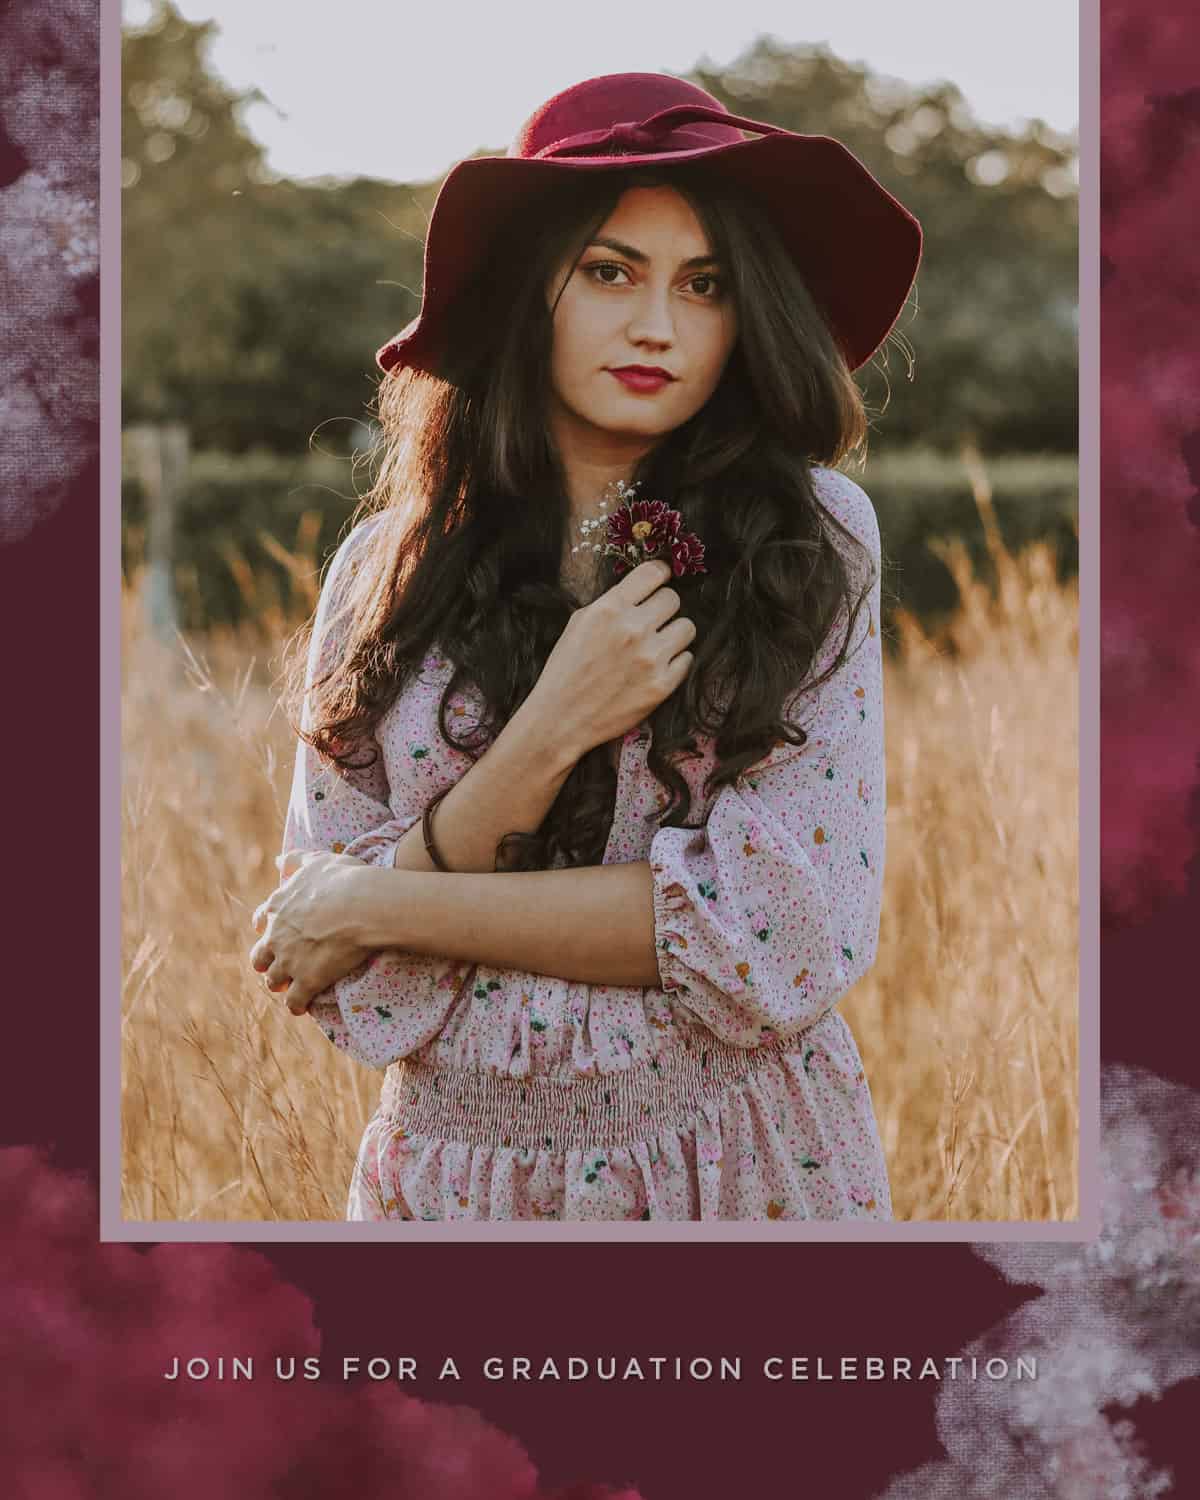 A stylized portrait of a young woman with long, wavy hair. She stands in a wheat-filled field wearing a lavender dress and a burgundy hat. She's holding tiny purple daisies in her hand.